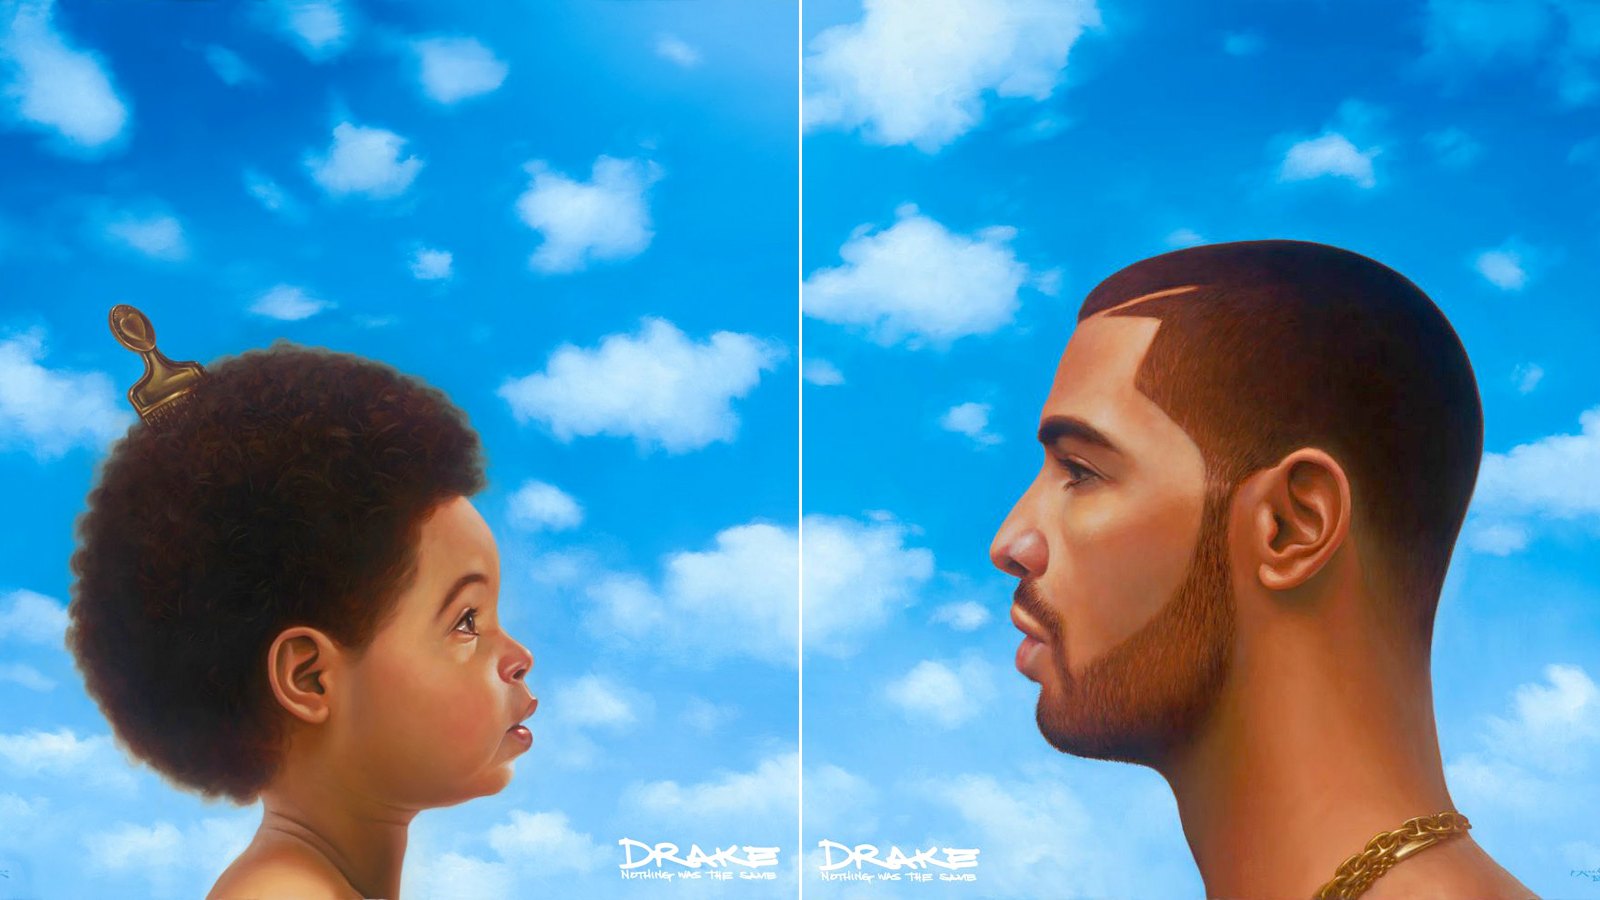 Blue Ivy Carter is not on the cover of Drake's new album